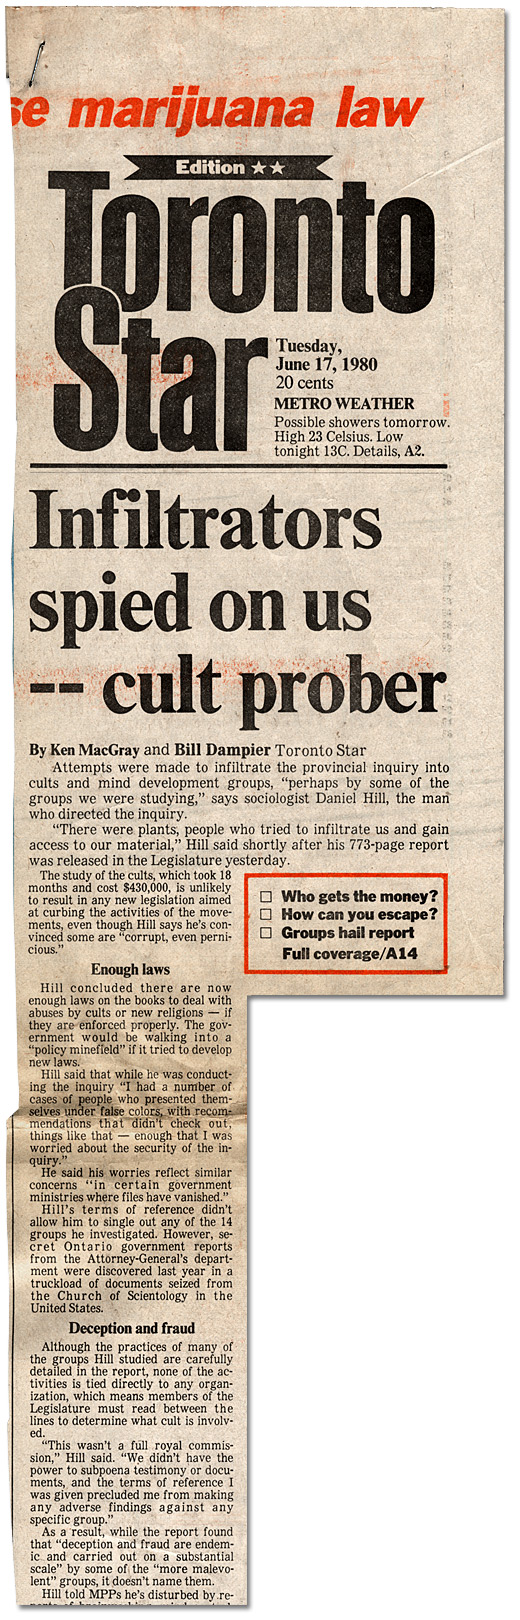 Clipping from the Toronto Star, "Infiltrators spied on us - cult prober", June 17, 1980 - Page 1